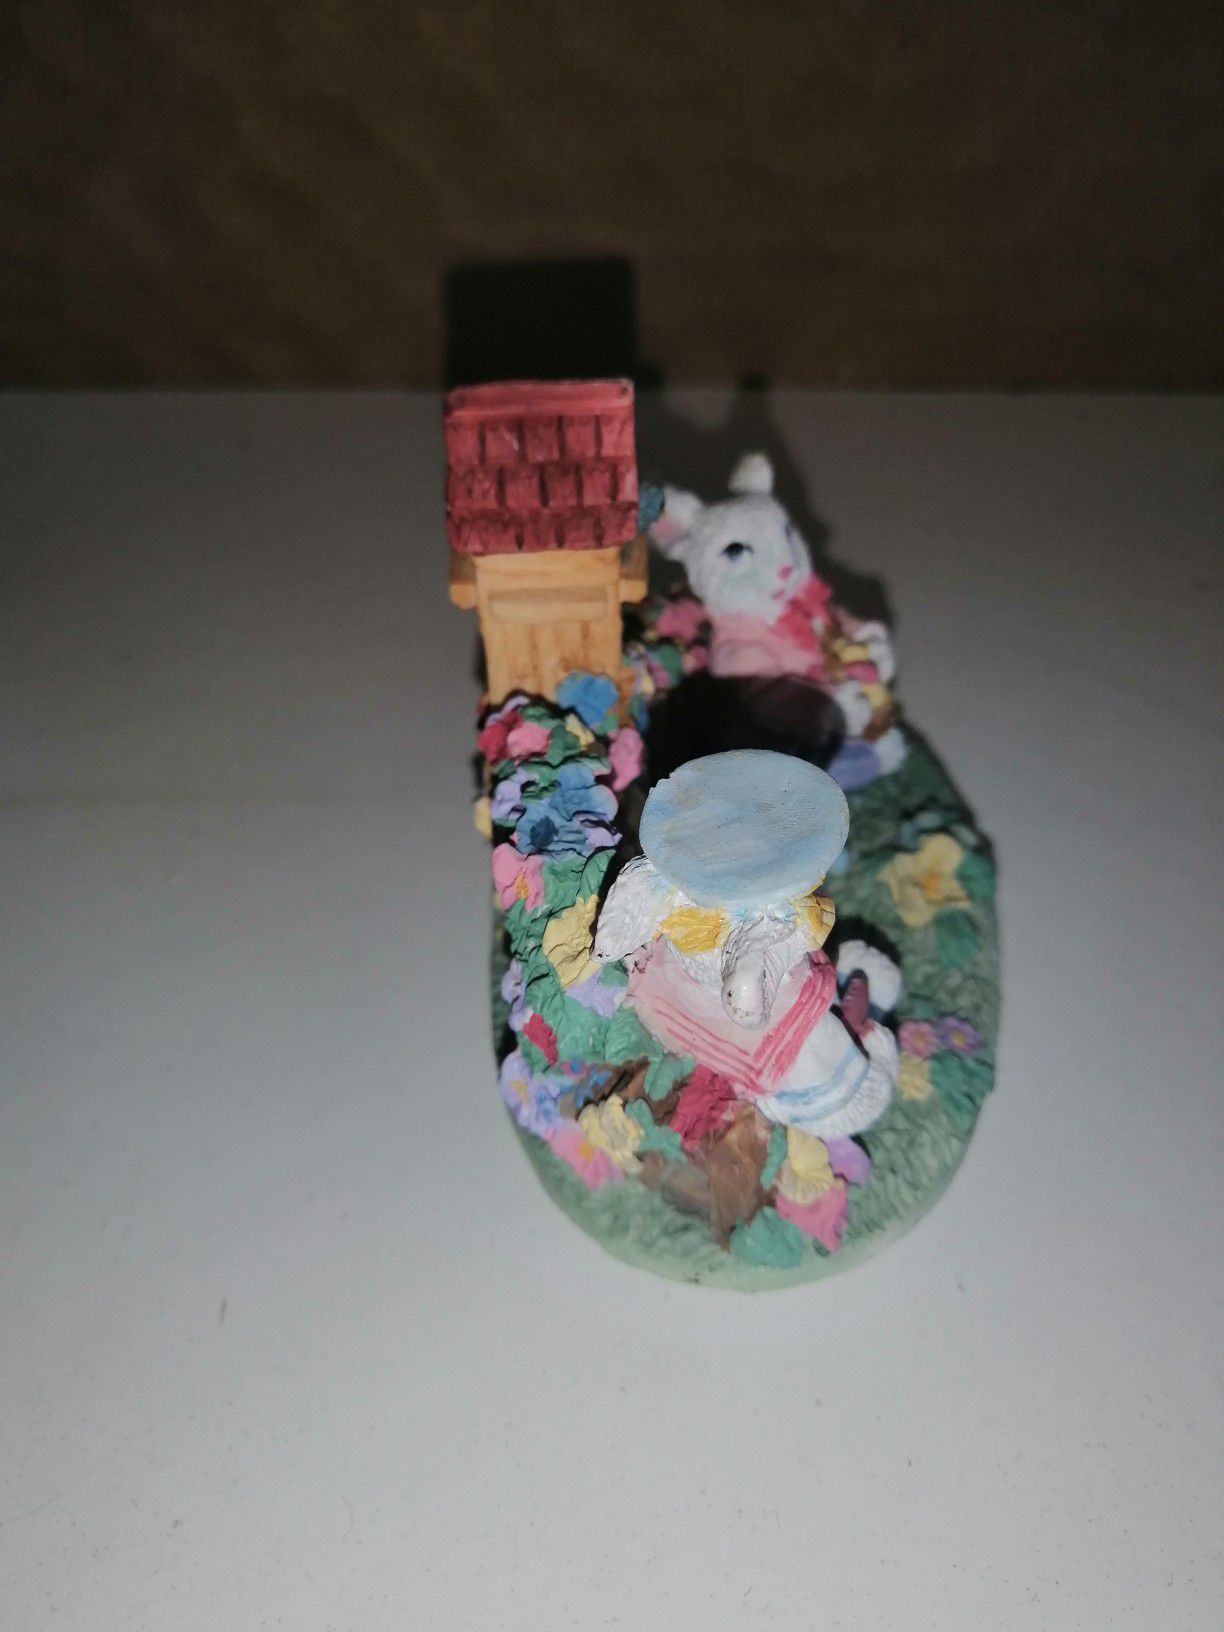 2 Bunnies with Easter Egg Basket and a Tower W4" x H3" x D3"